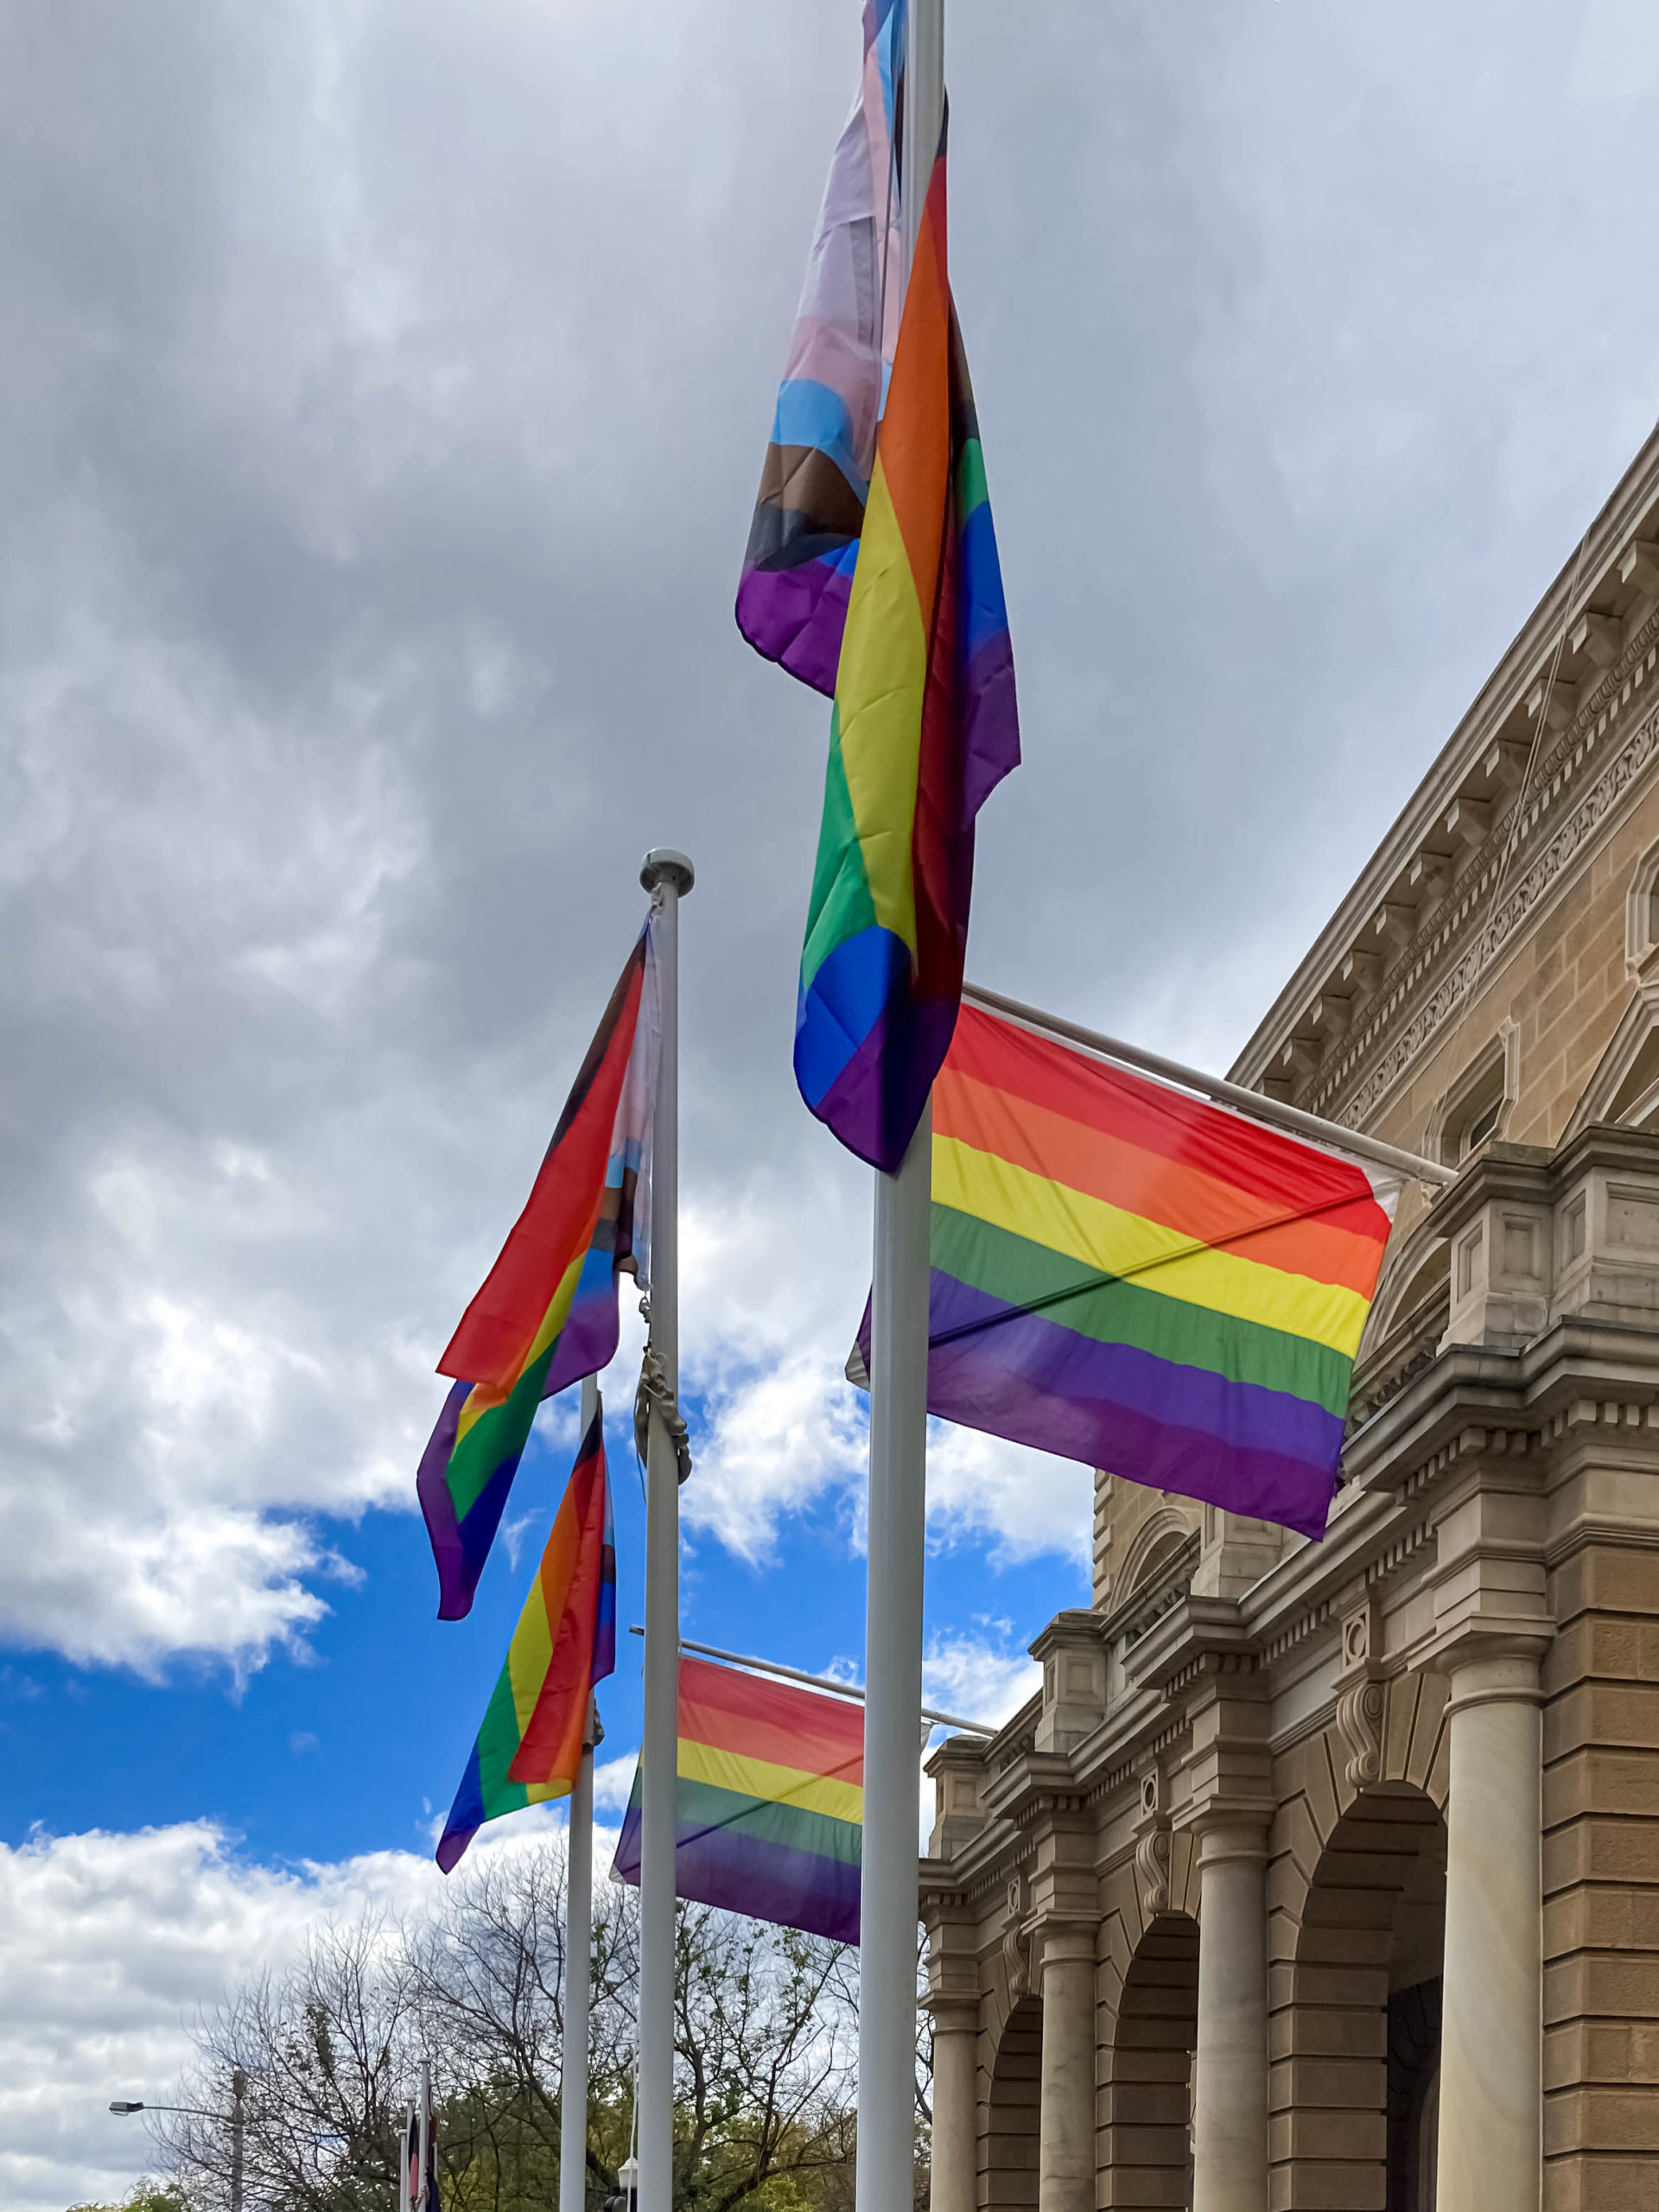 Five rainbow flags representing the LGBTIQA+ community flying outside a large sandstone building